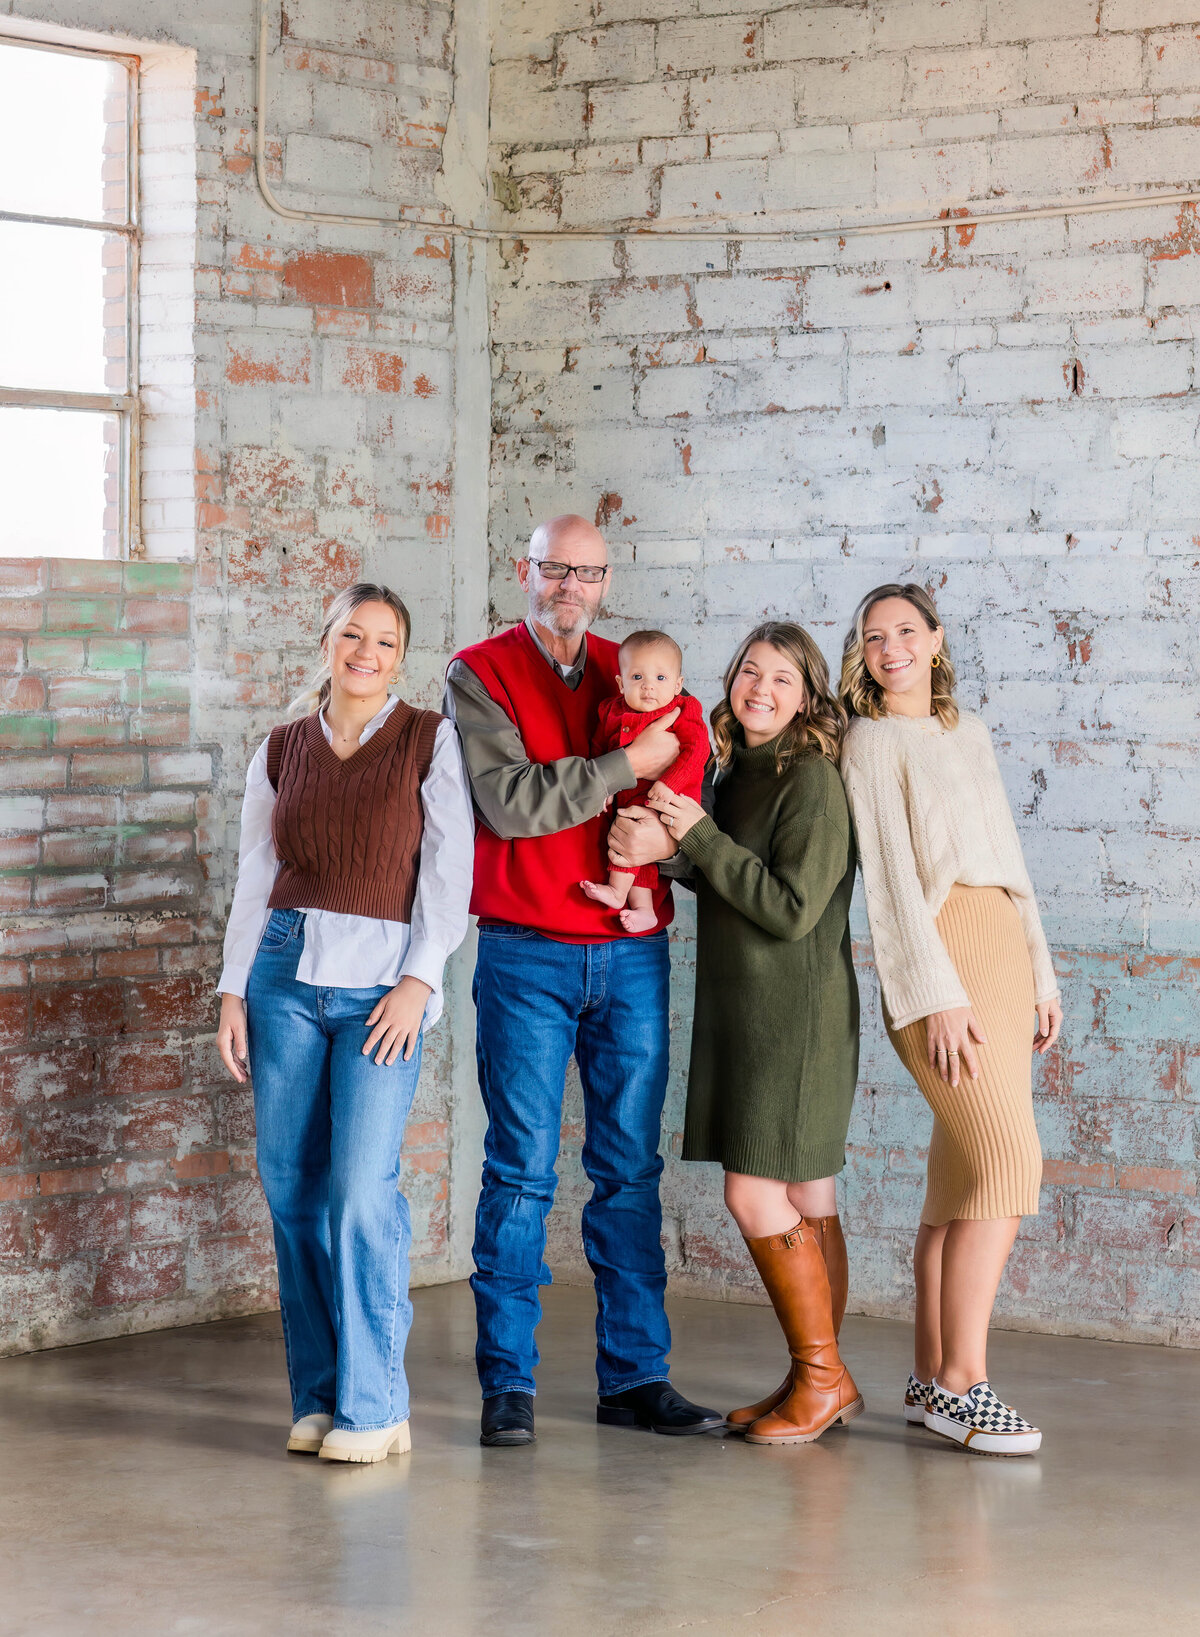 Dad posed with 3 daughter's and grandson with all looking at the camera during an indoor winter family session.  One  woman is wearing a brown vest over a white long sleeved blouse with jeans, man is wearing a red vest over an olive shirt with jeans.  another woman is wearing an olive green sweater dress with brown leather boots and the other woman is wearing a cream sweater with a khaki skirt and checkered vans.  The baby is wearing a red sweater romper.